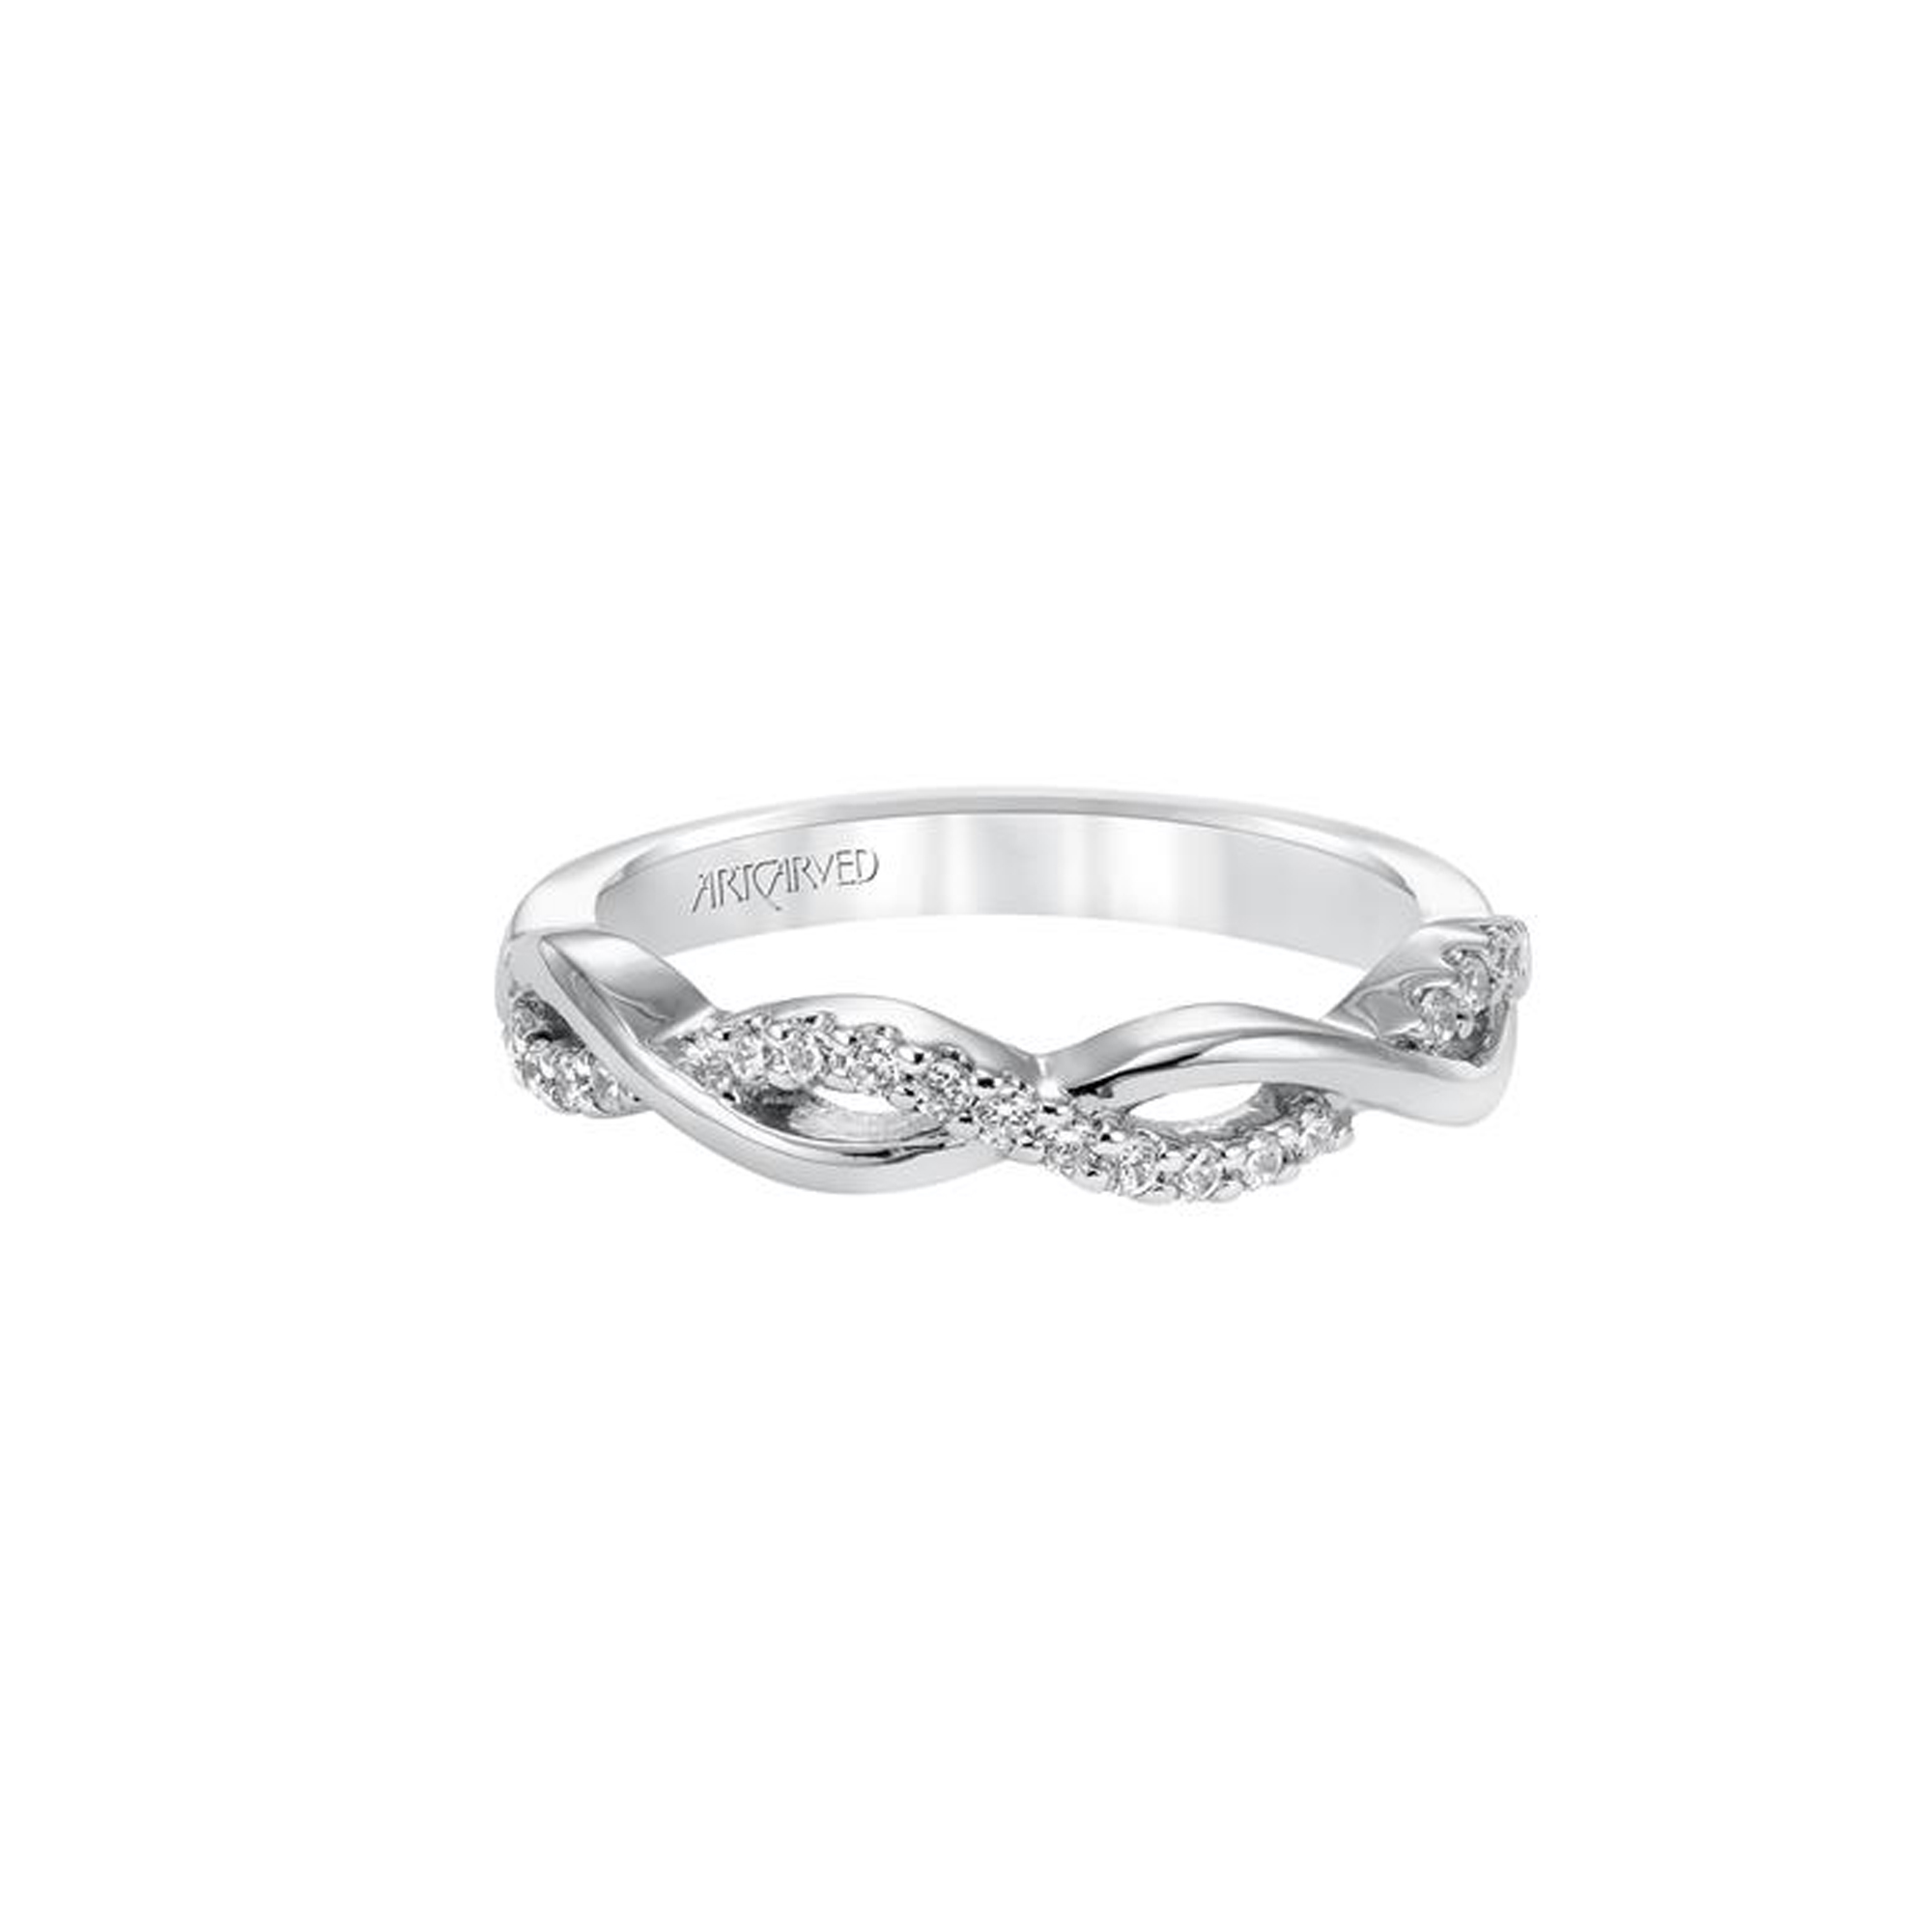 ArtCarved Diamond Twisted Wedding Band in White Gold